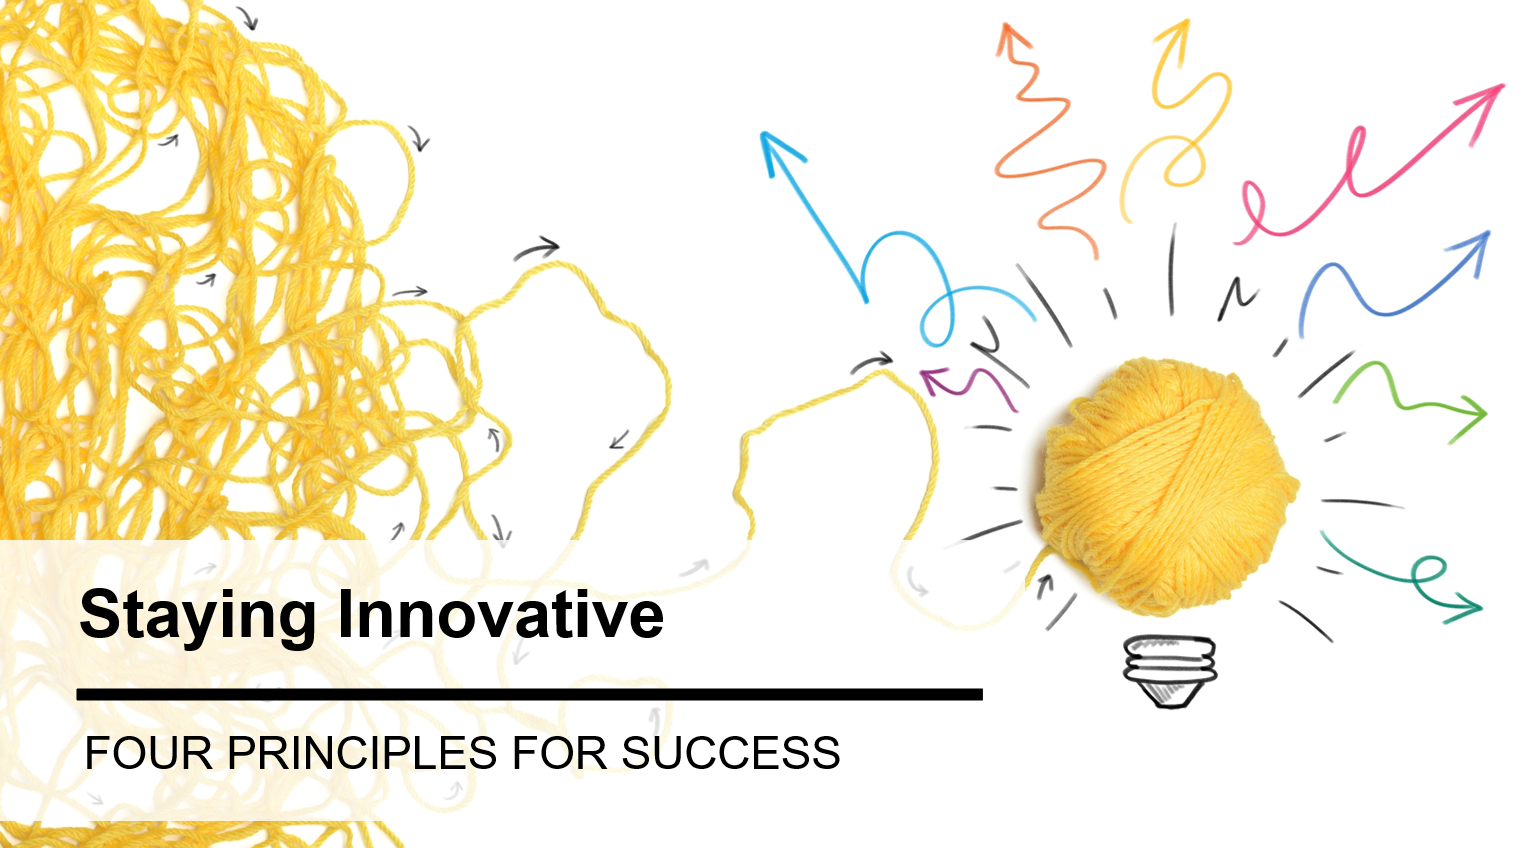 Staying Innovative - Principles for Success in the Beverage Industry